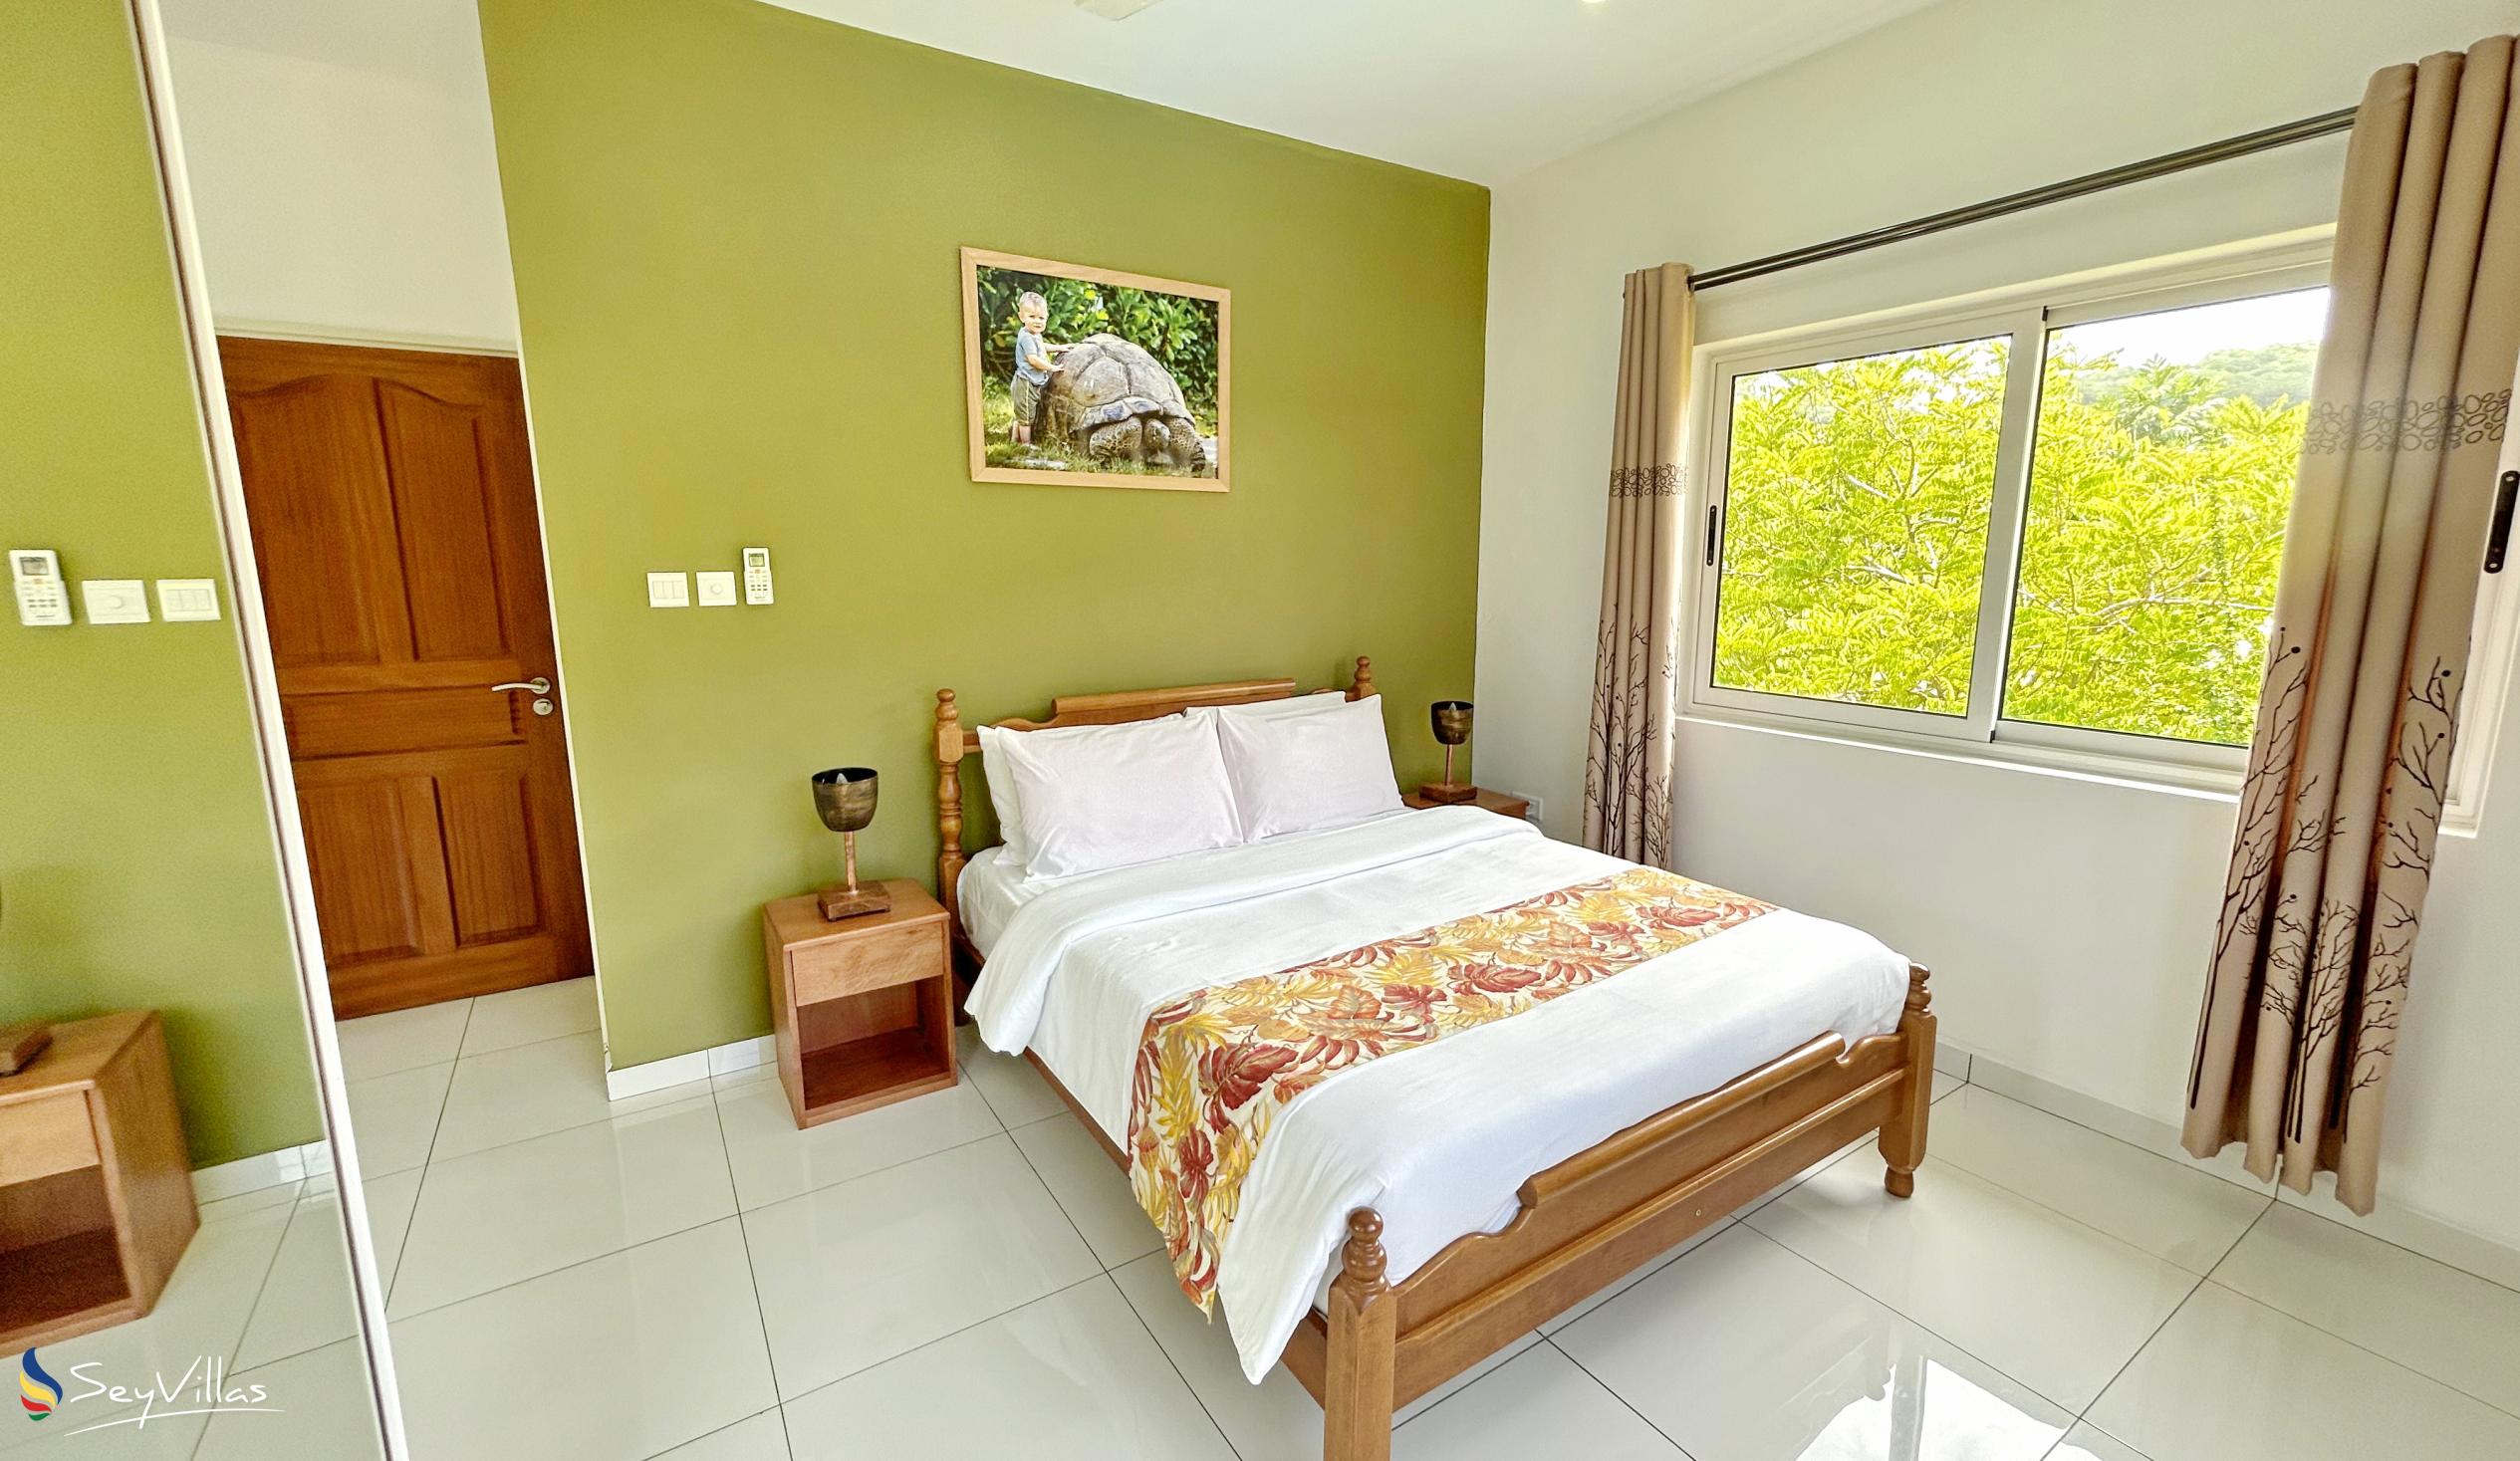 Foto 48: The Seaboards Apartments - Appartement 2 chambres - Mahé (Seychelles)